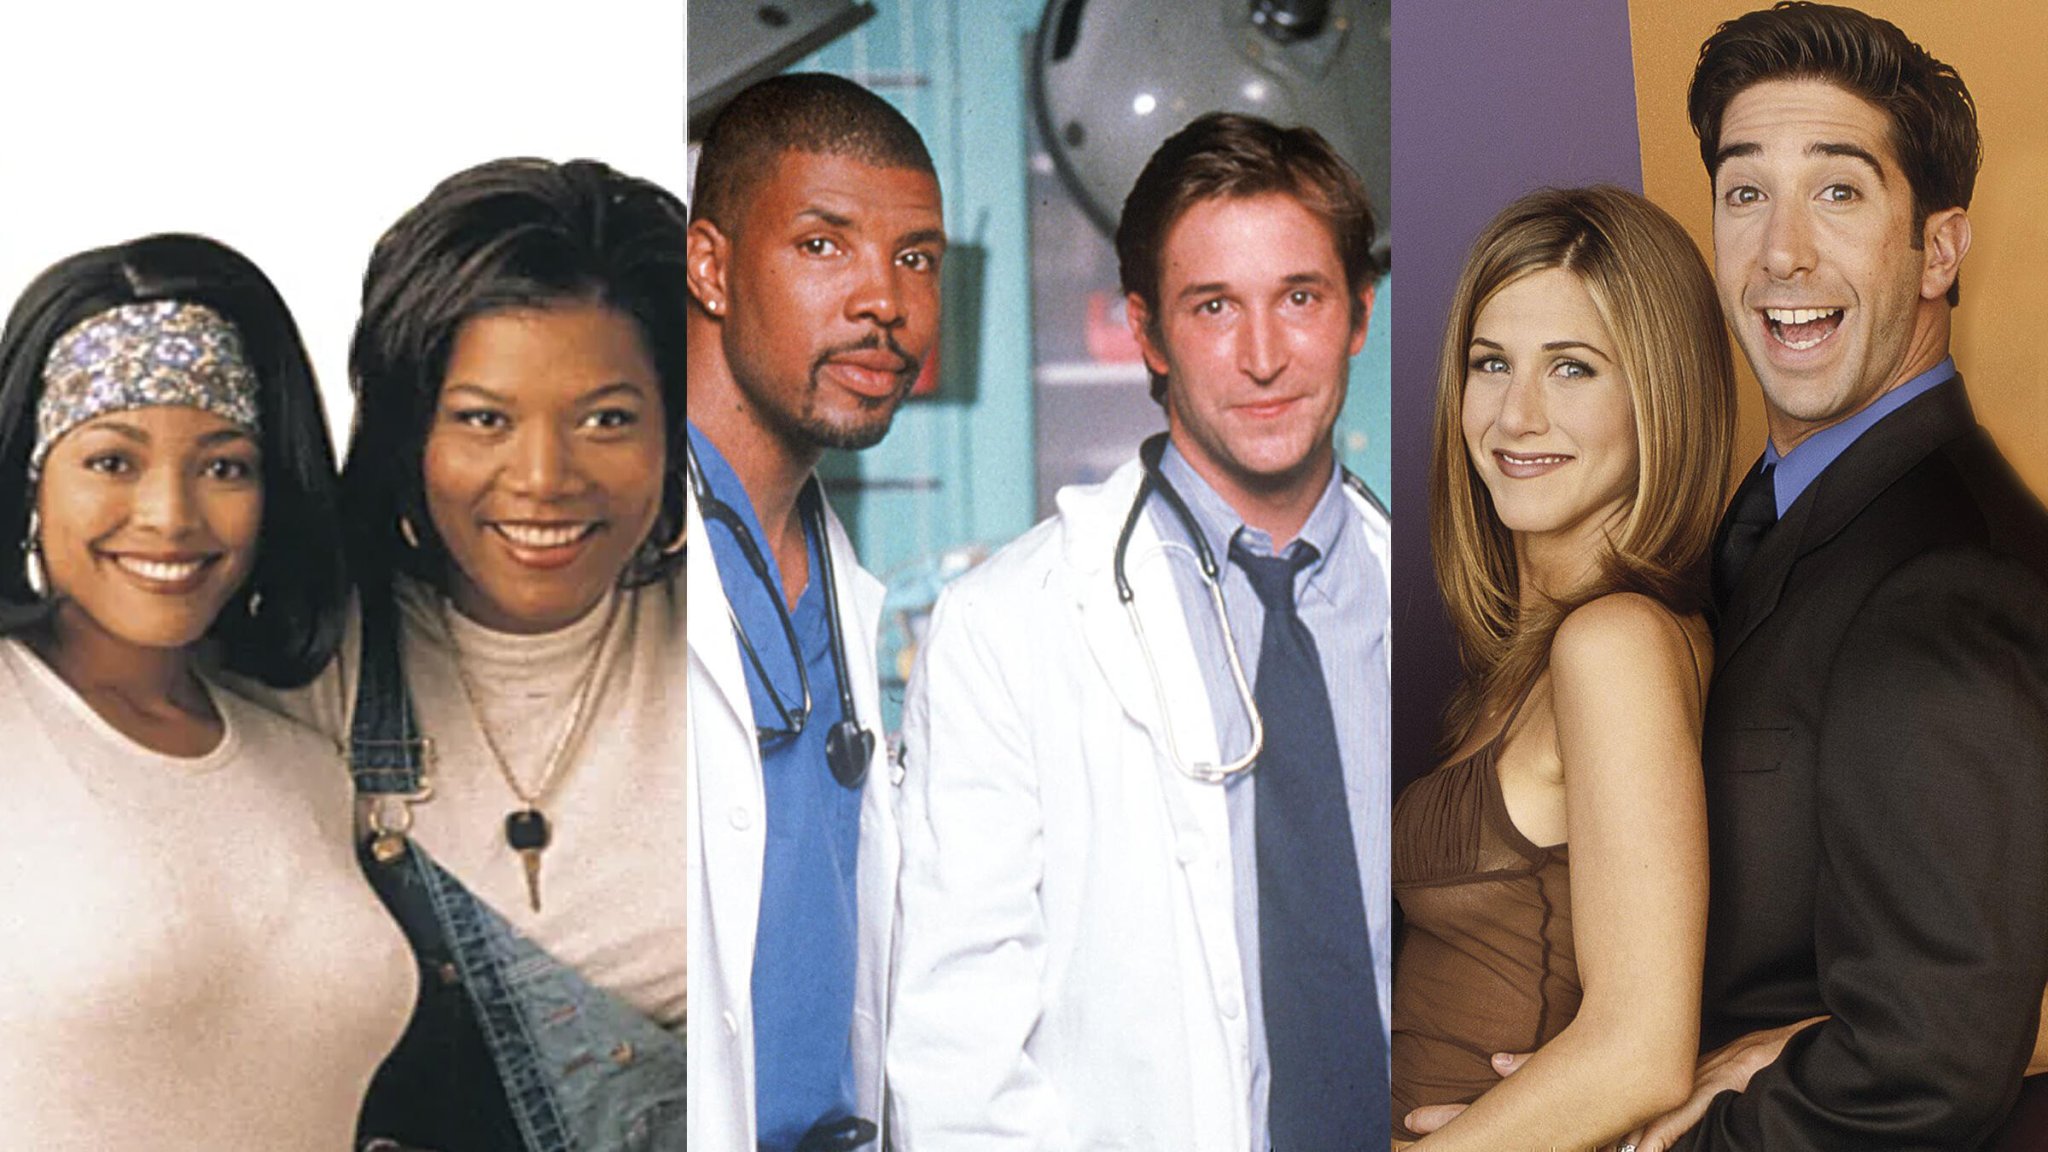 The Best '90s Shows to Watch Right Now